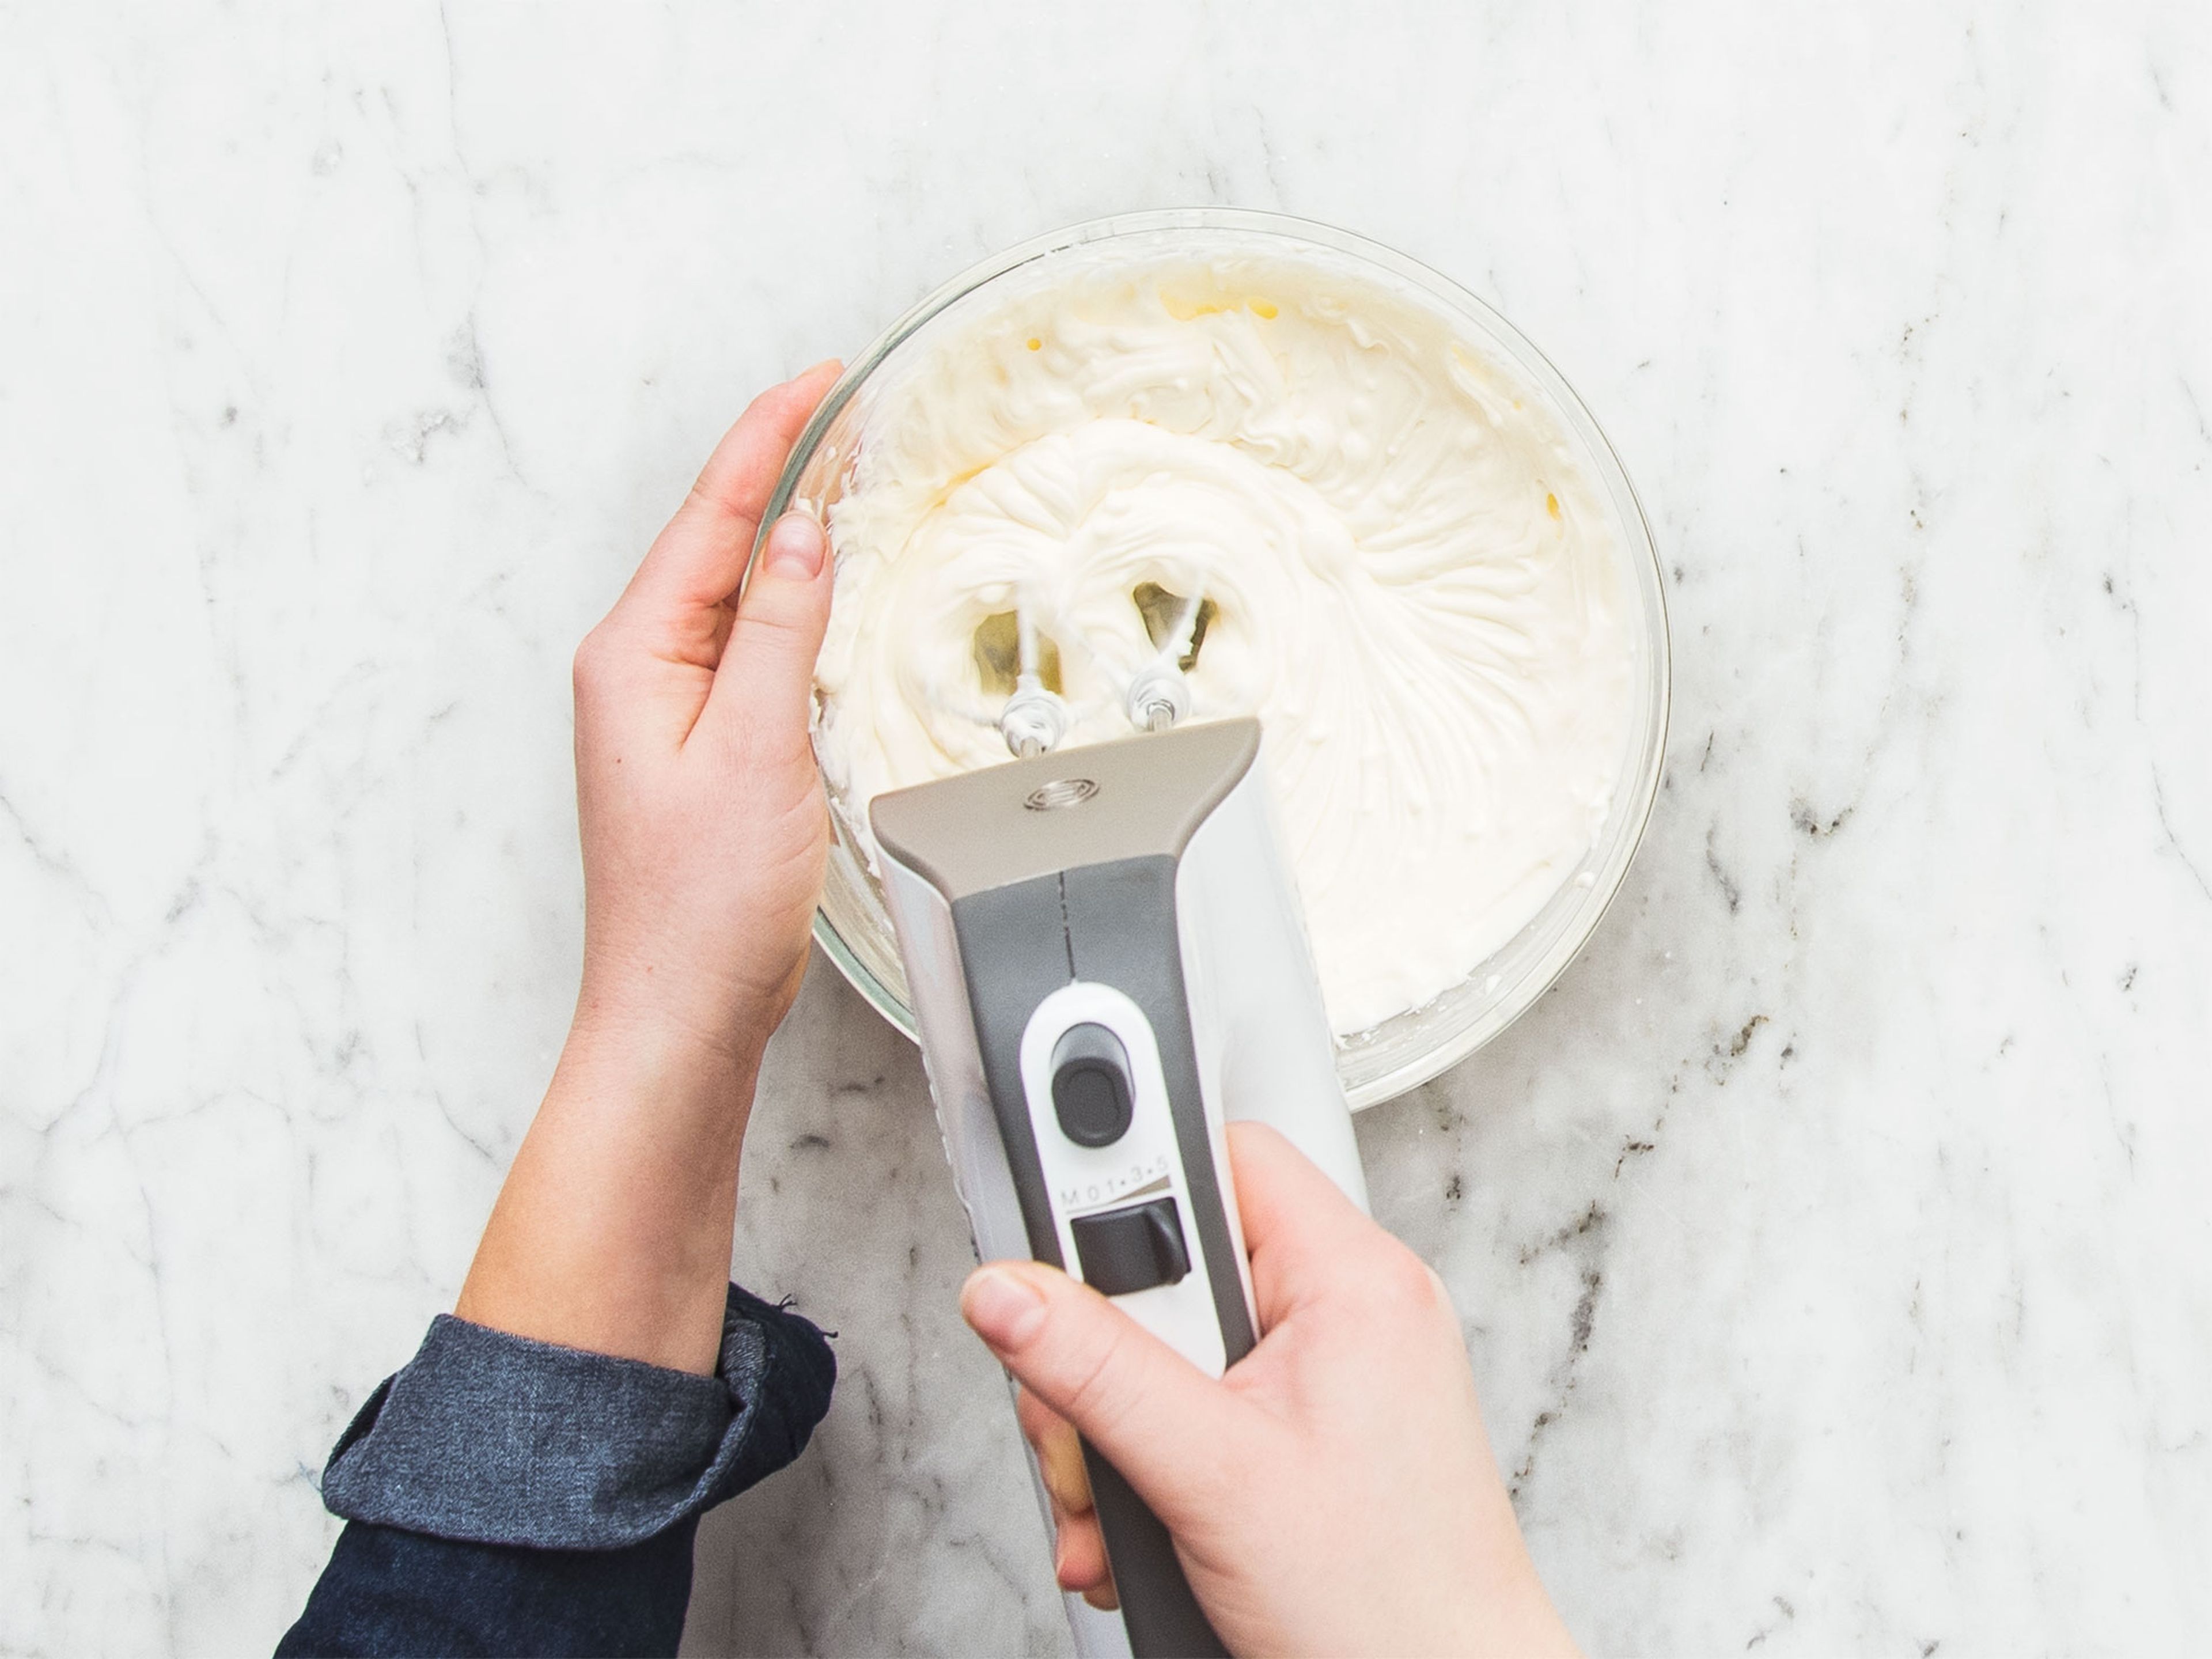 Add cream cheese, mascarpone cheese, confectioner’s sugar, and vanilla extract to a bowl and use a hand mixer with beaters to combine until creamy. Allow to cool in the fridge.